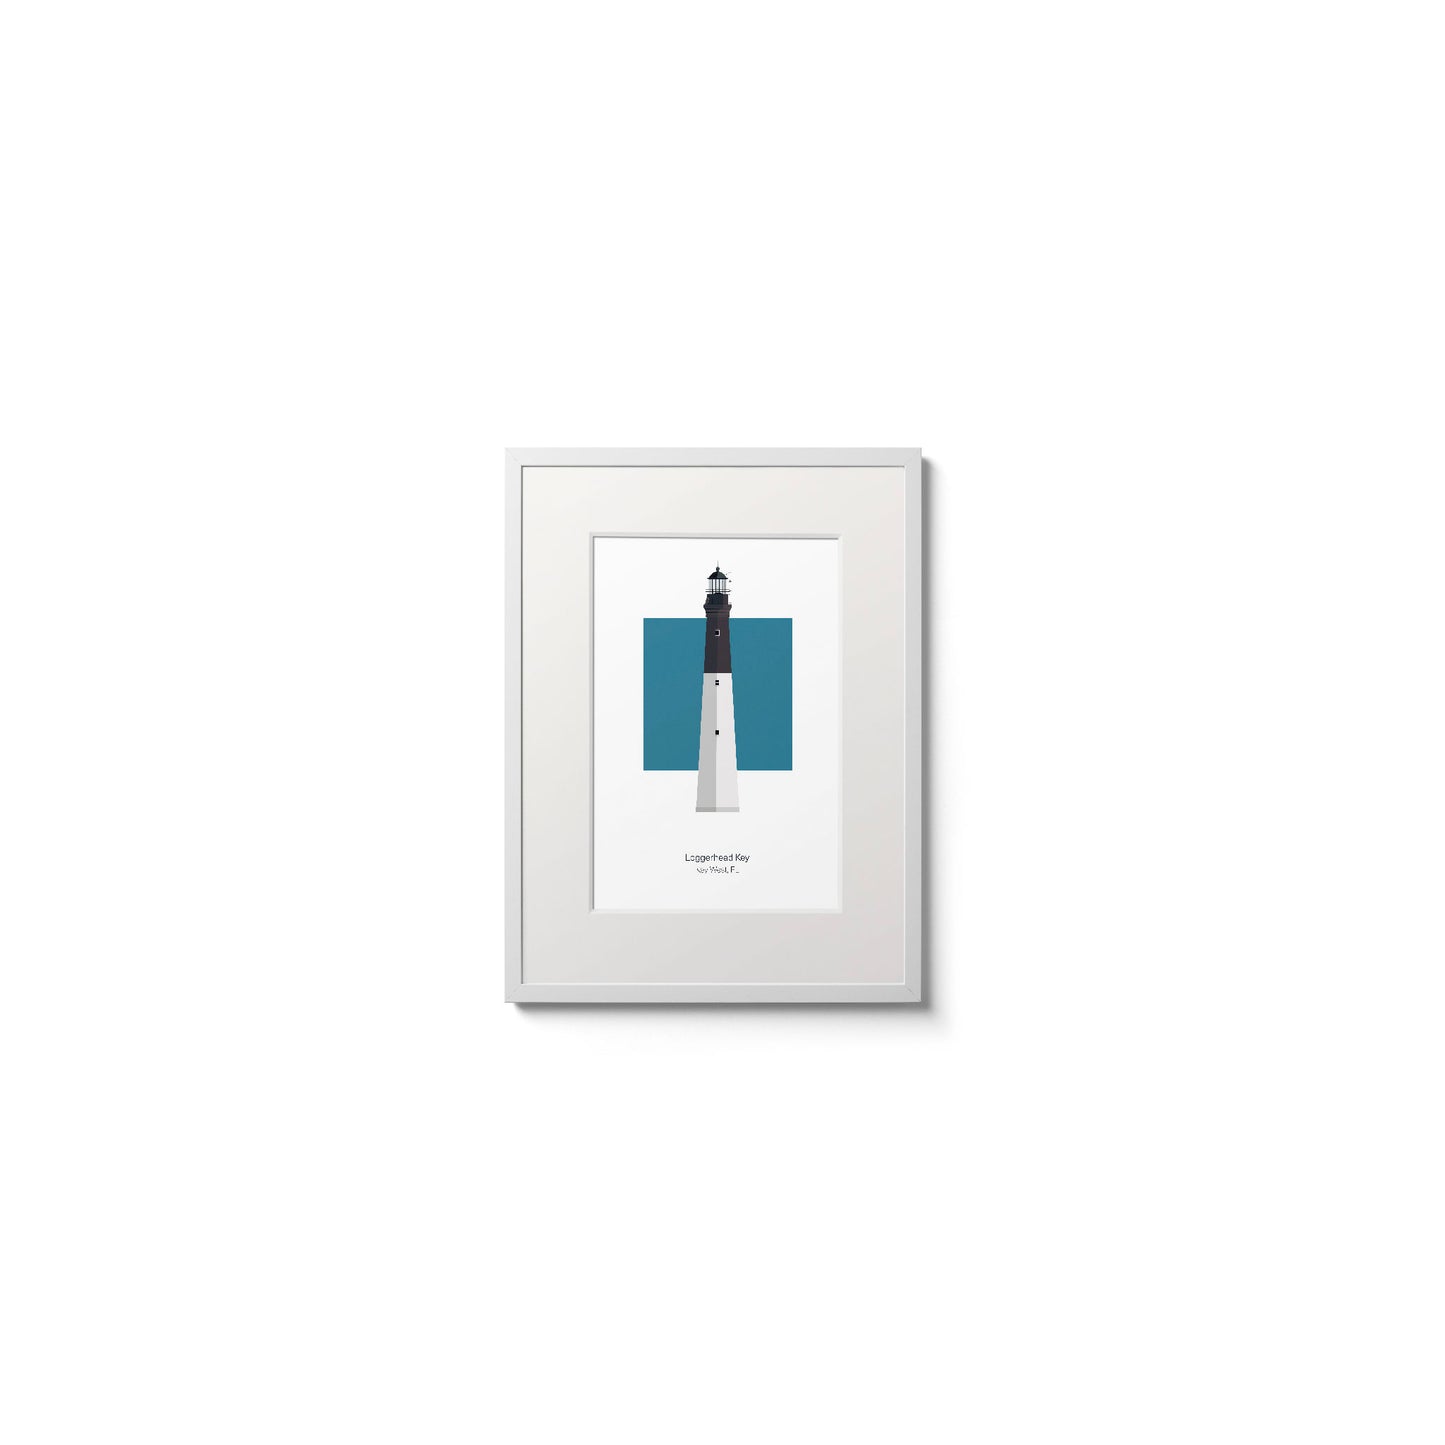 Illustration of the Loggerhead lighthouse, Florida, USA. On a white background with aqua blue square as a backdrop., in a white frame  and measuring 6"x8" (15x20cm).